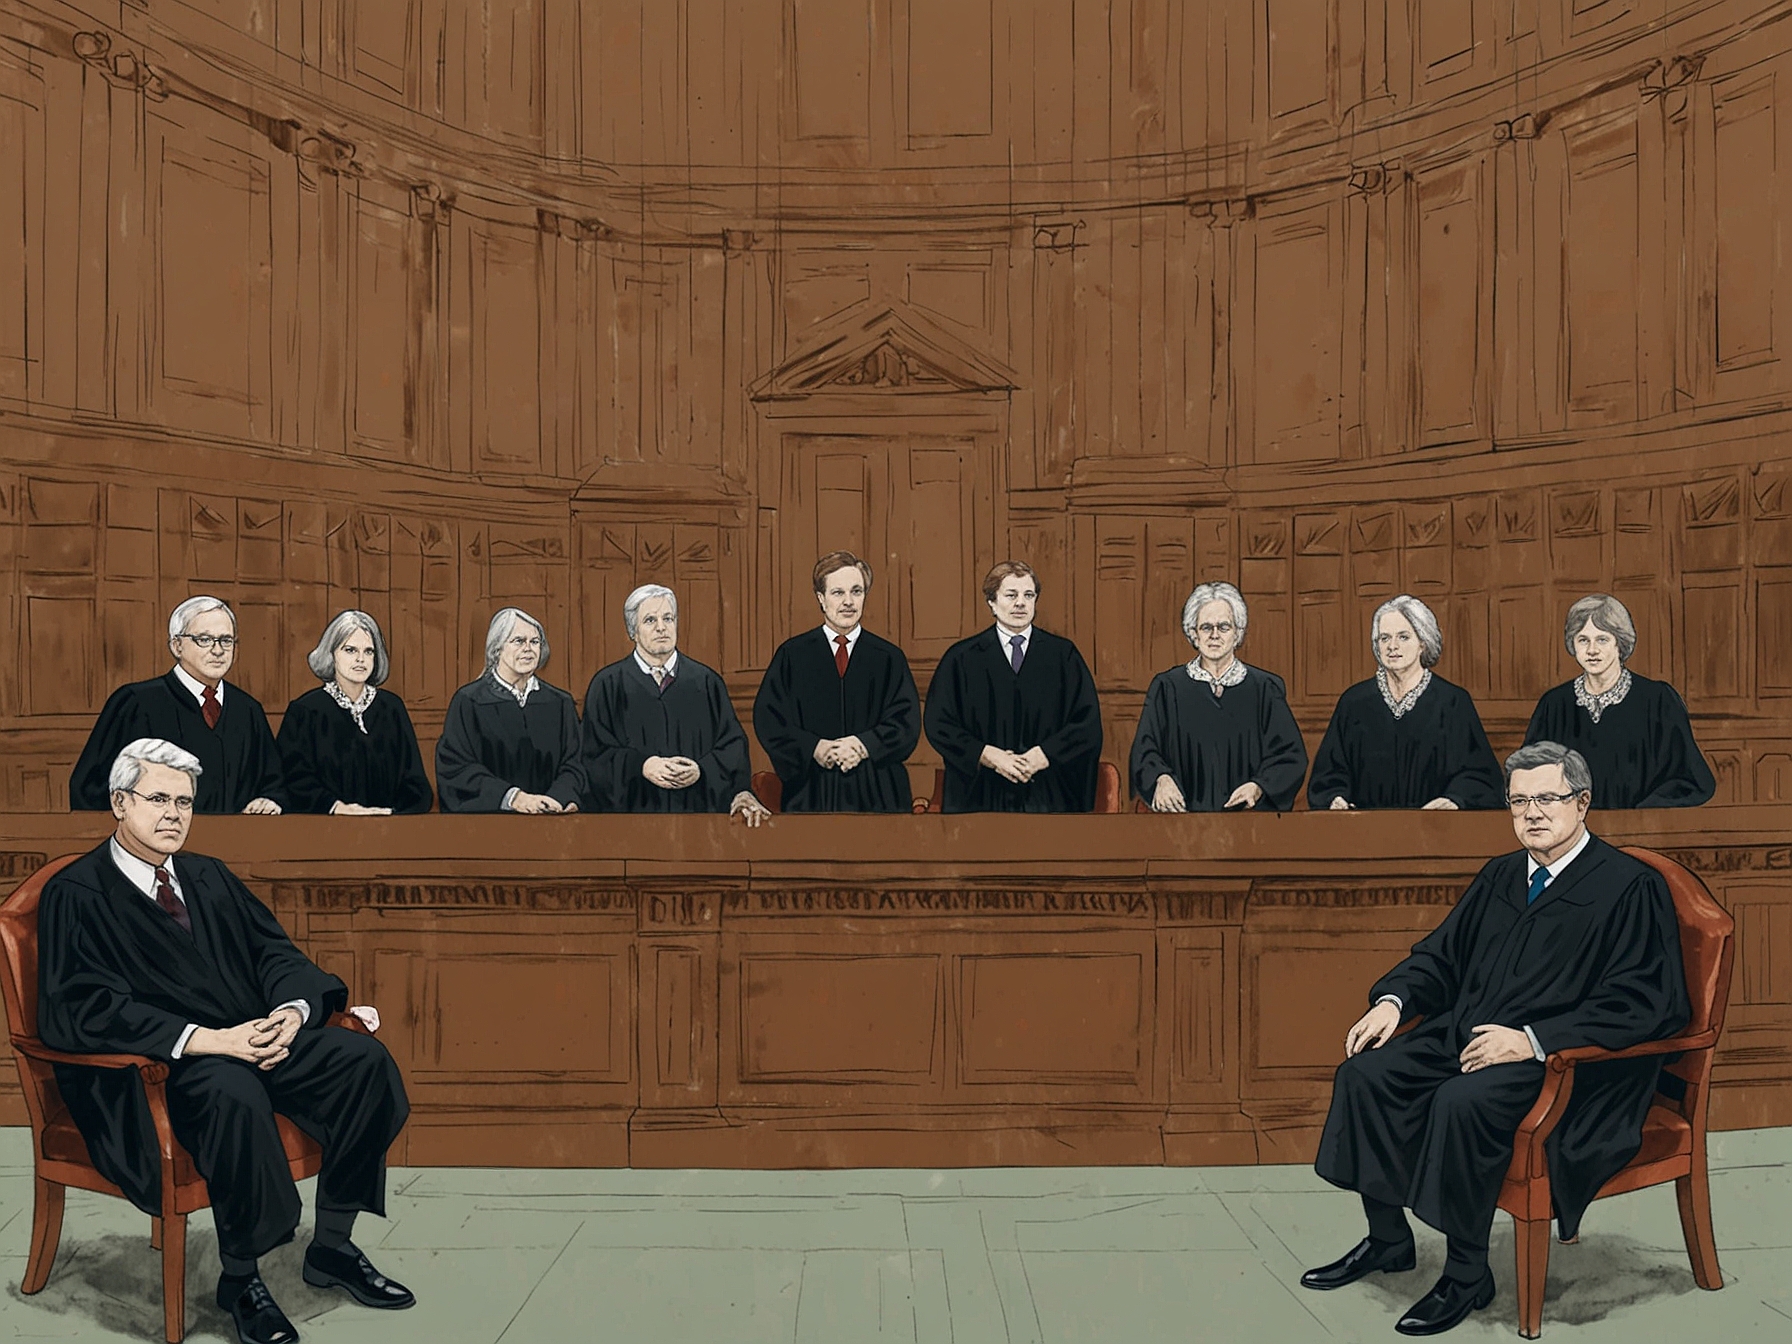 A divided Supreme Court with Justices expressing differing opinions on presidential immunity, highlighting the ideological clashes over the balance of executive authority.